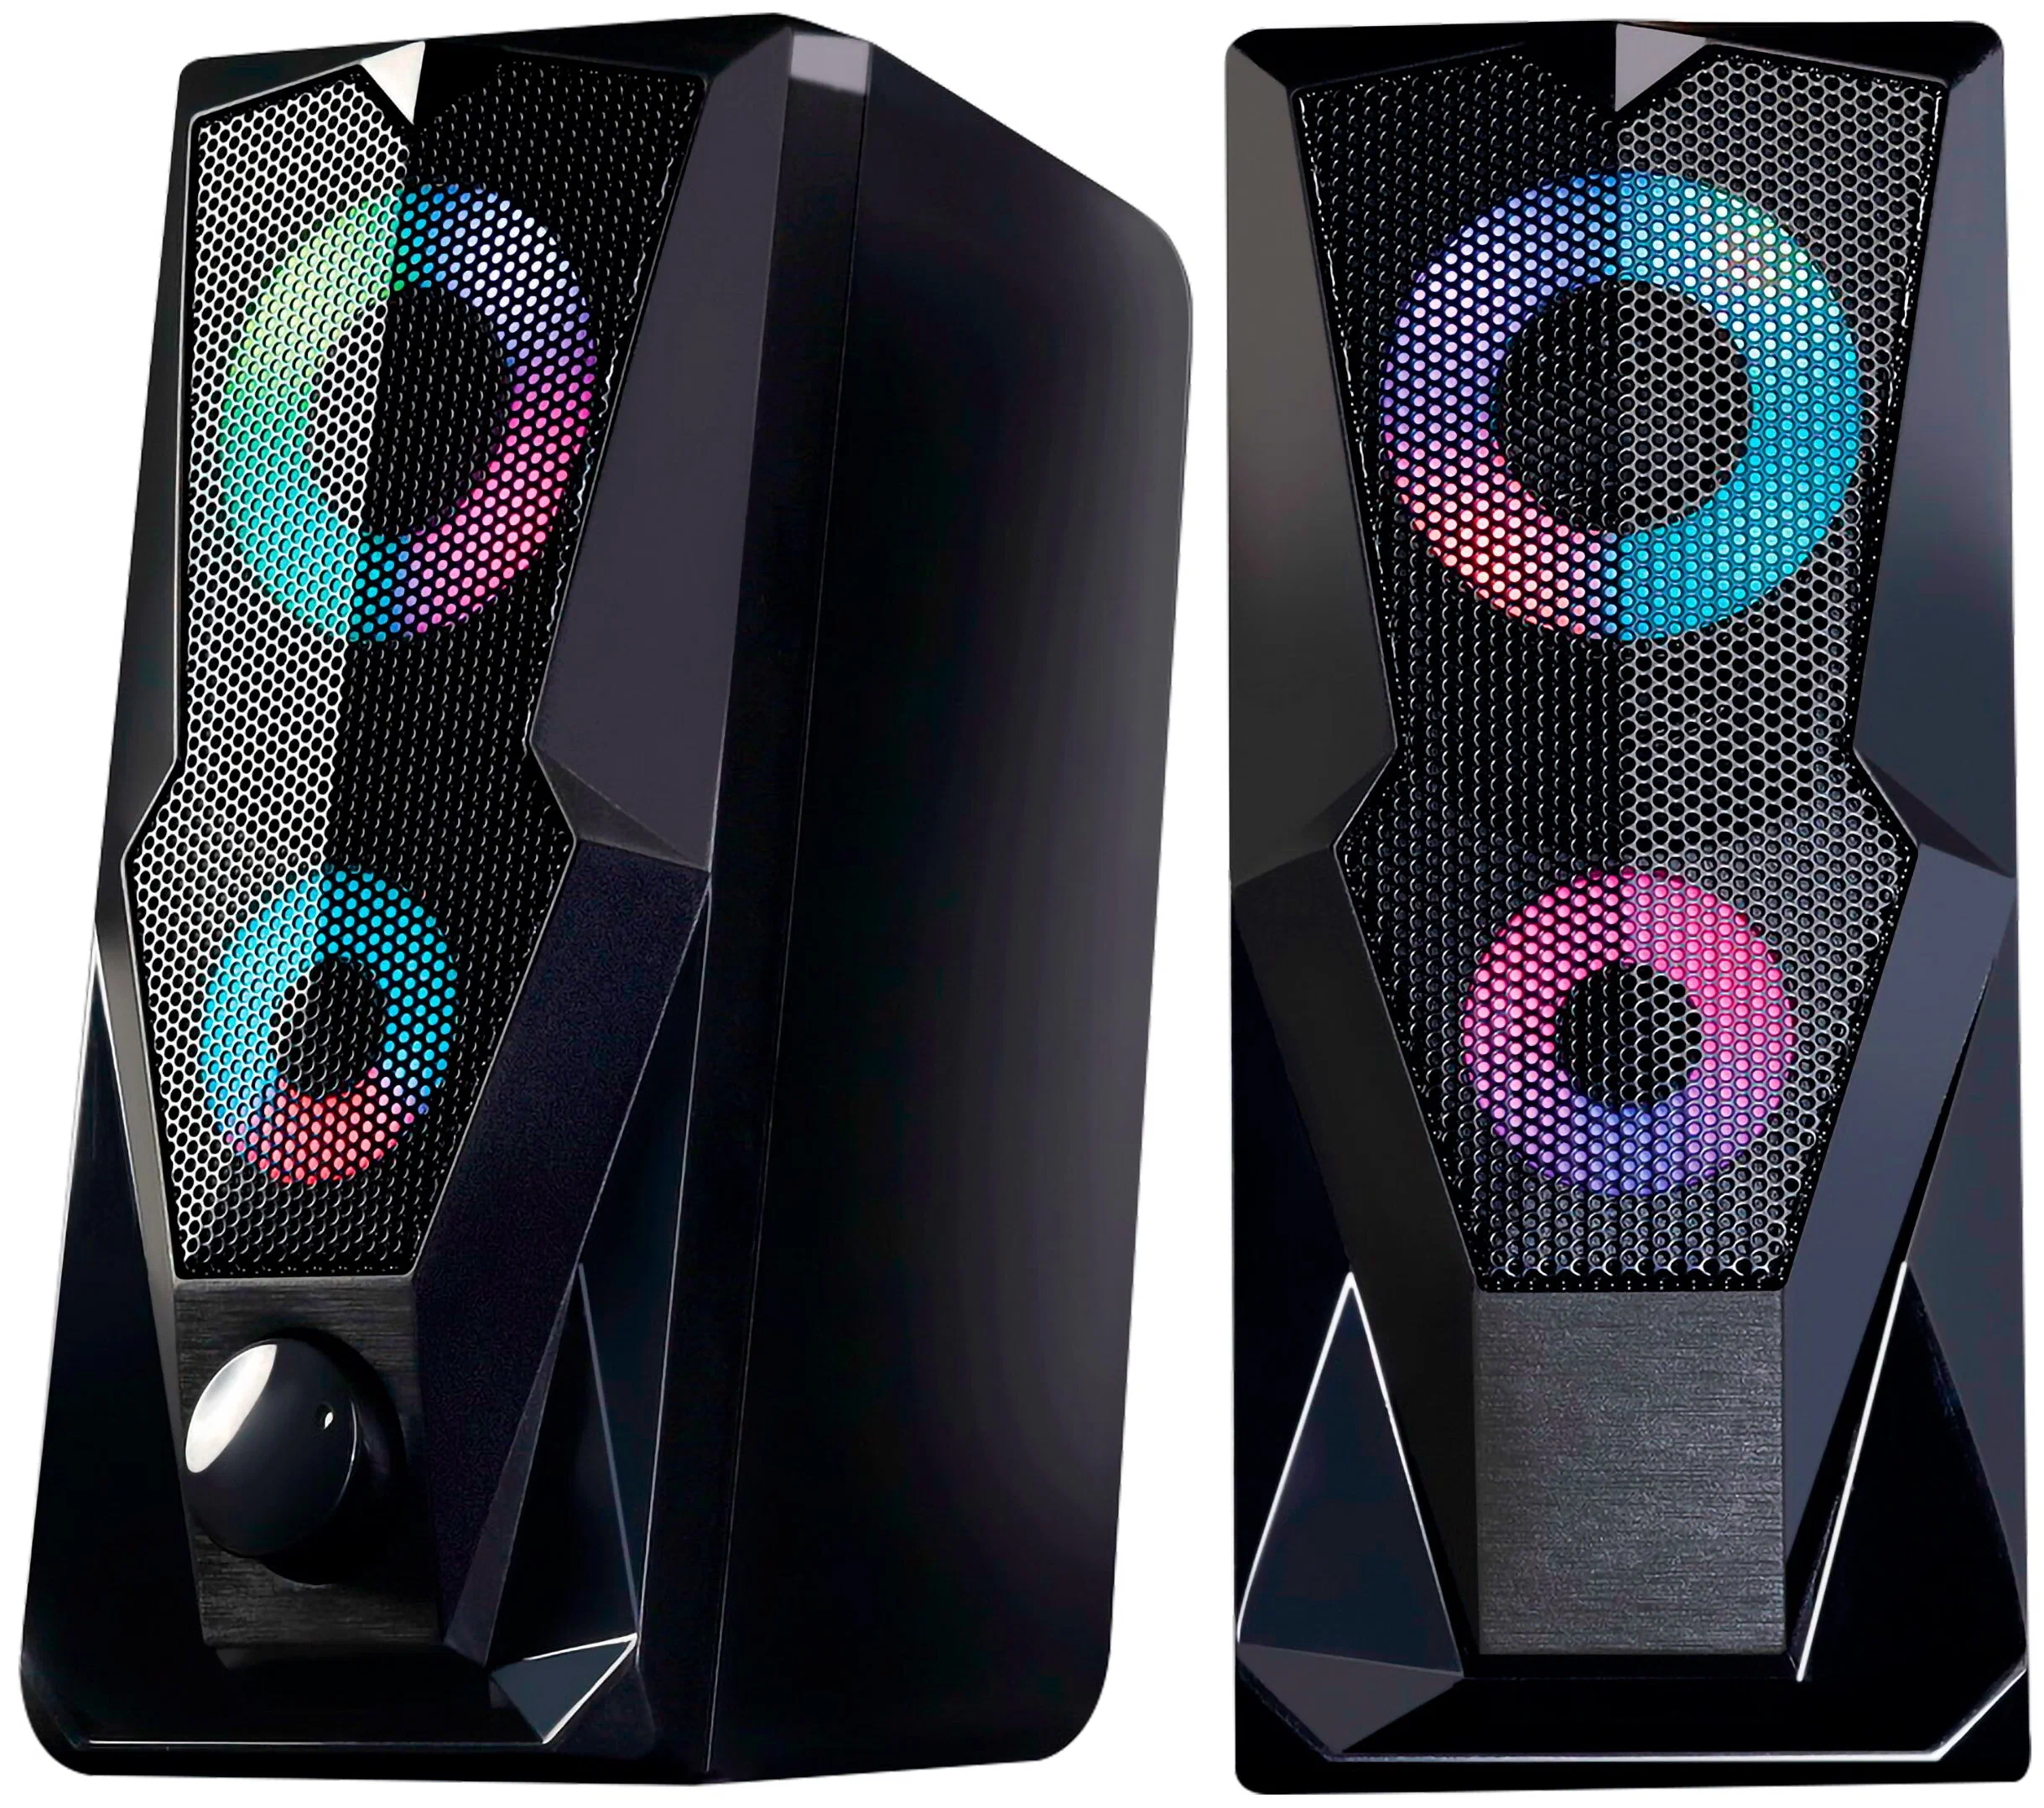 6W RGB Computer Speakers: Experience Sound and Light in One!